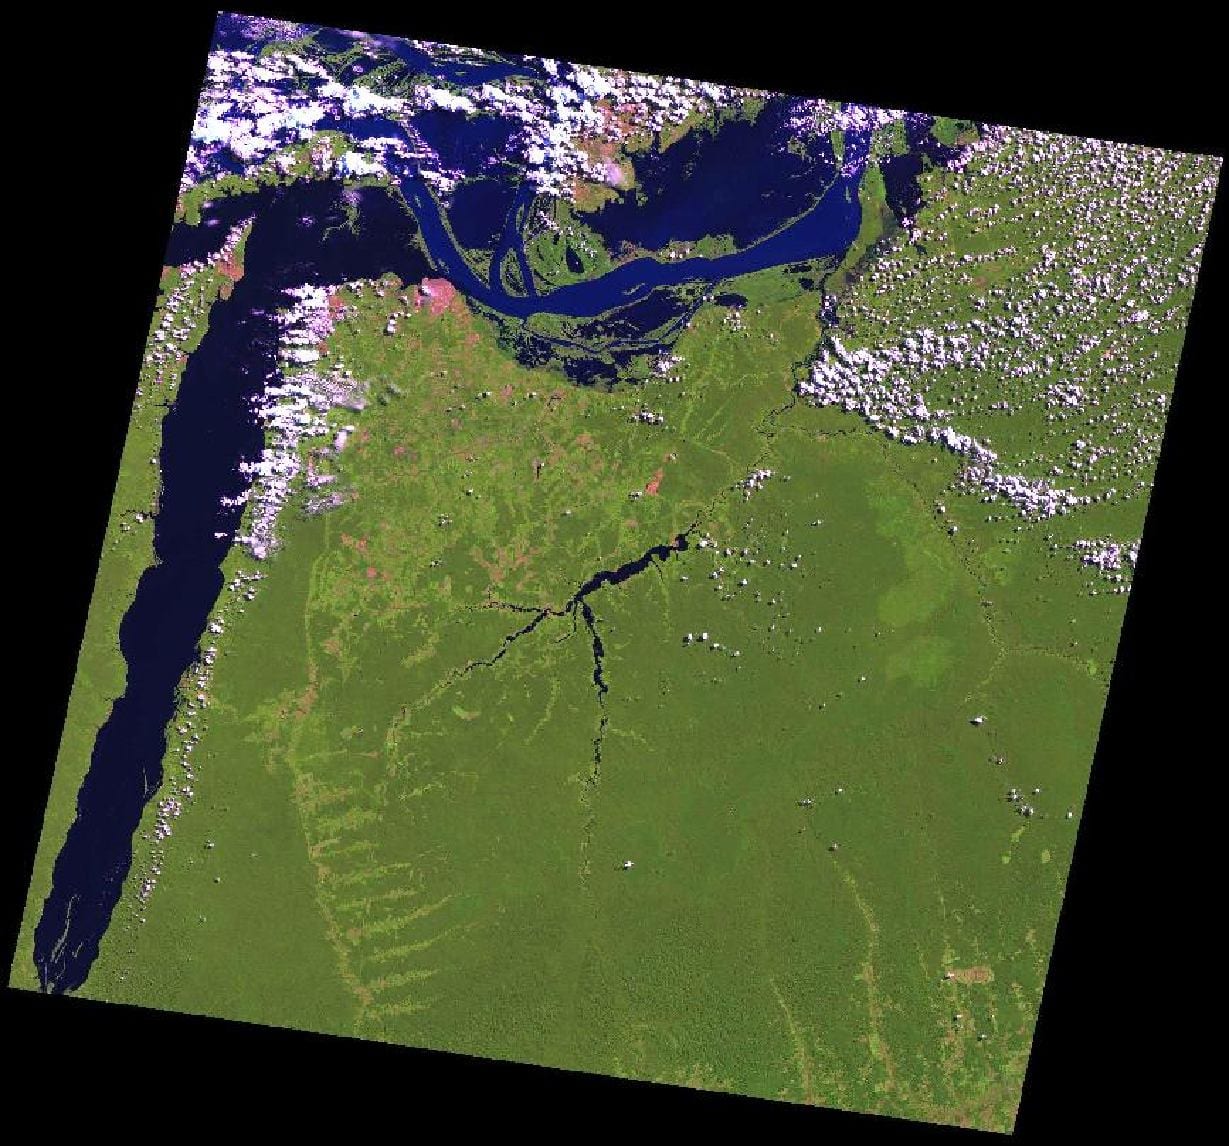 Figure 4. Example Forest  Carbon Tracking Initiative image available through U.S. Geological Survey's EarthExplorer web site. Image details: Entity ID: